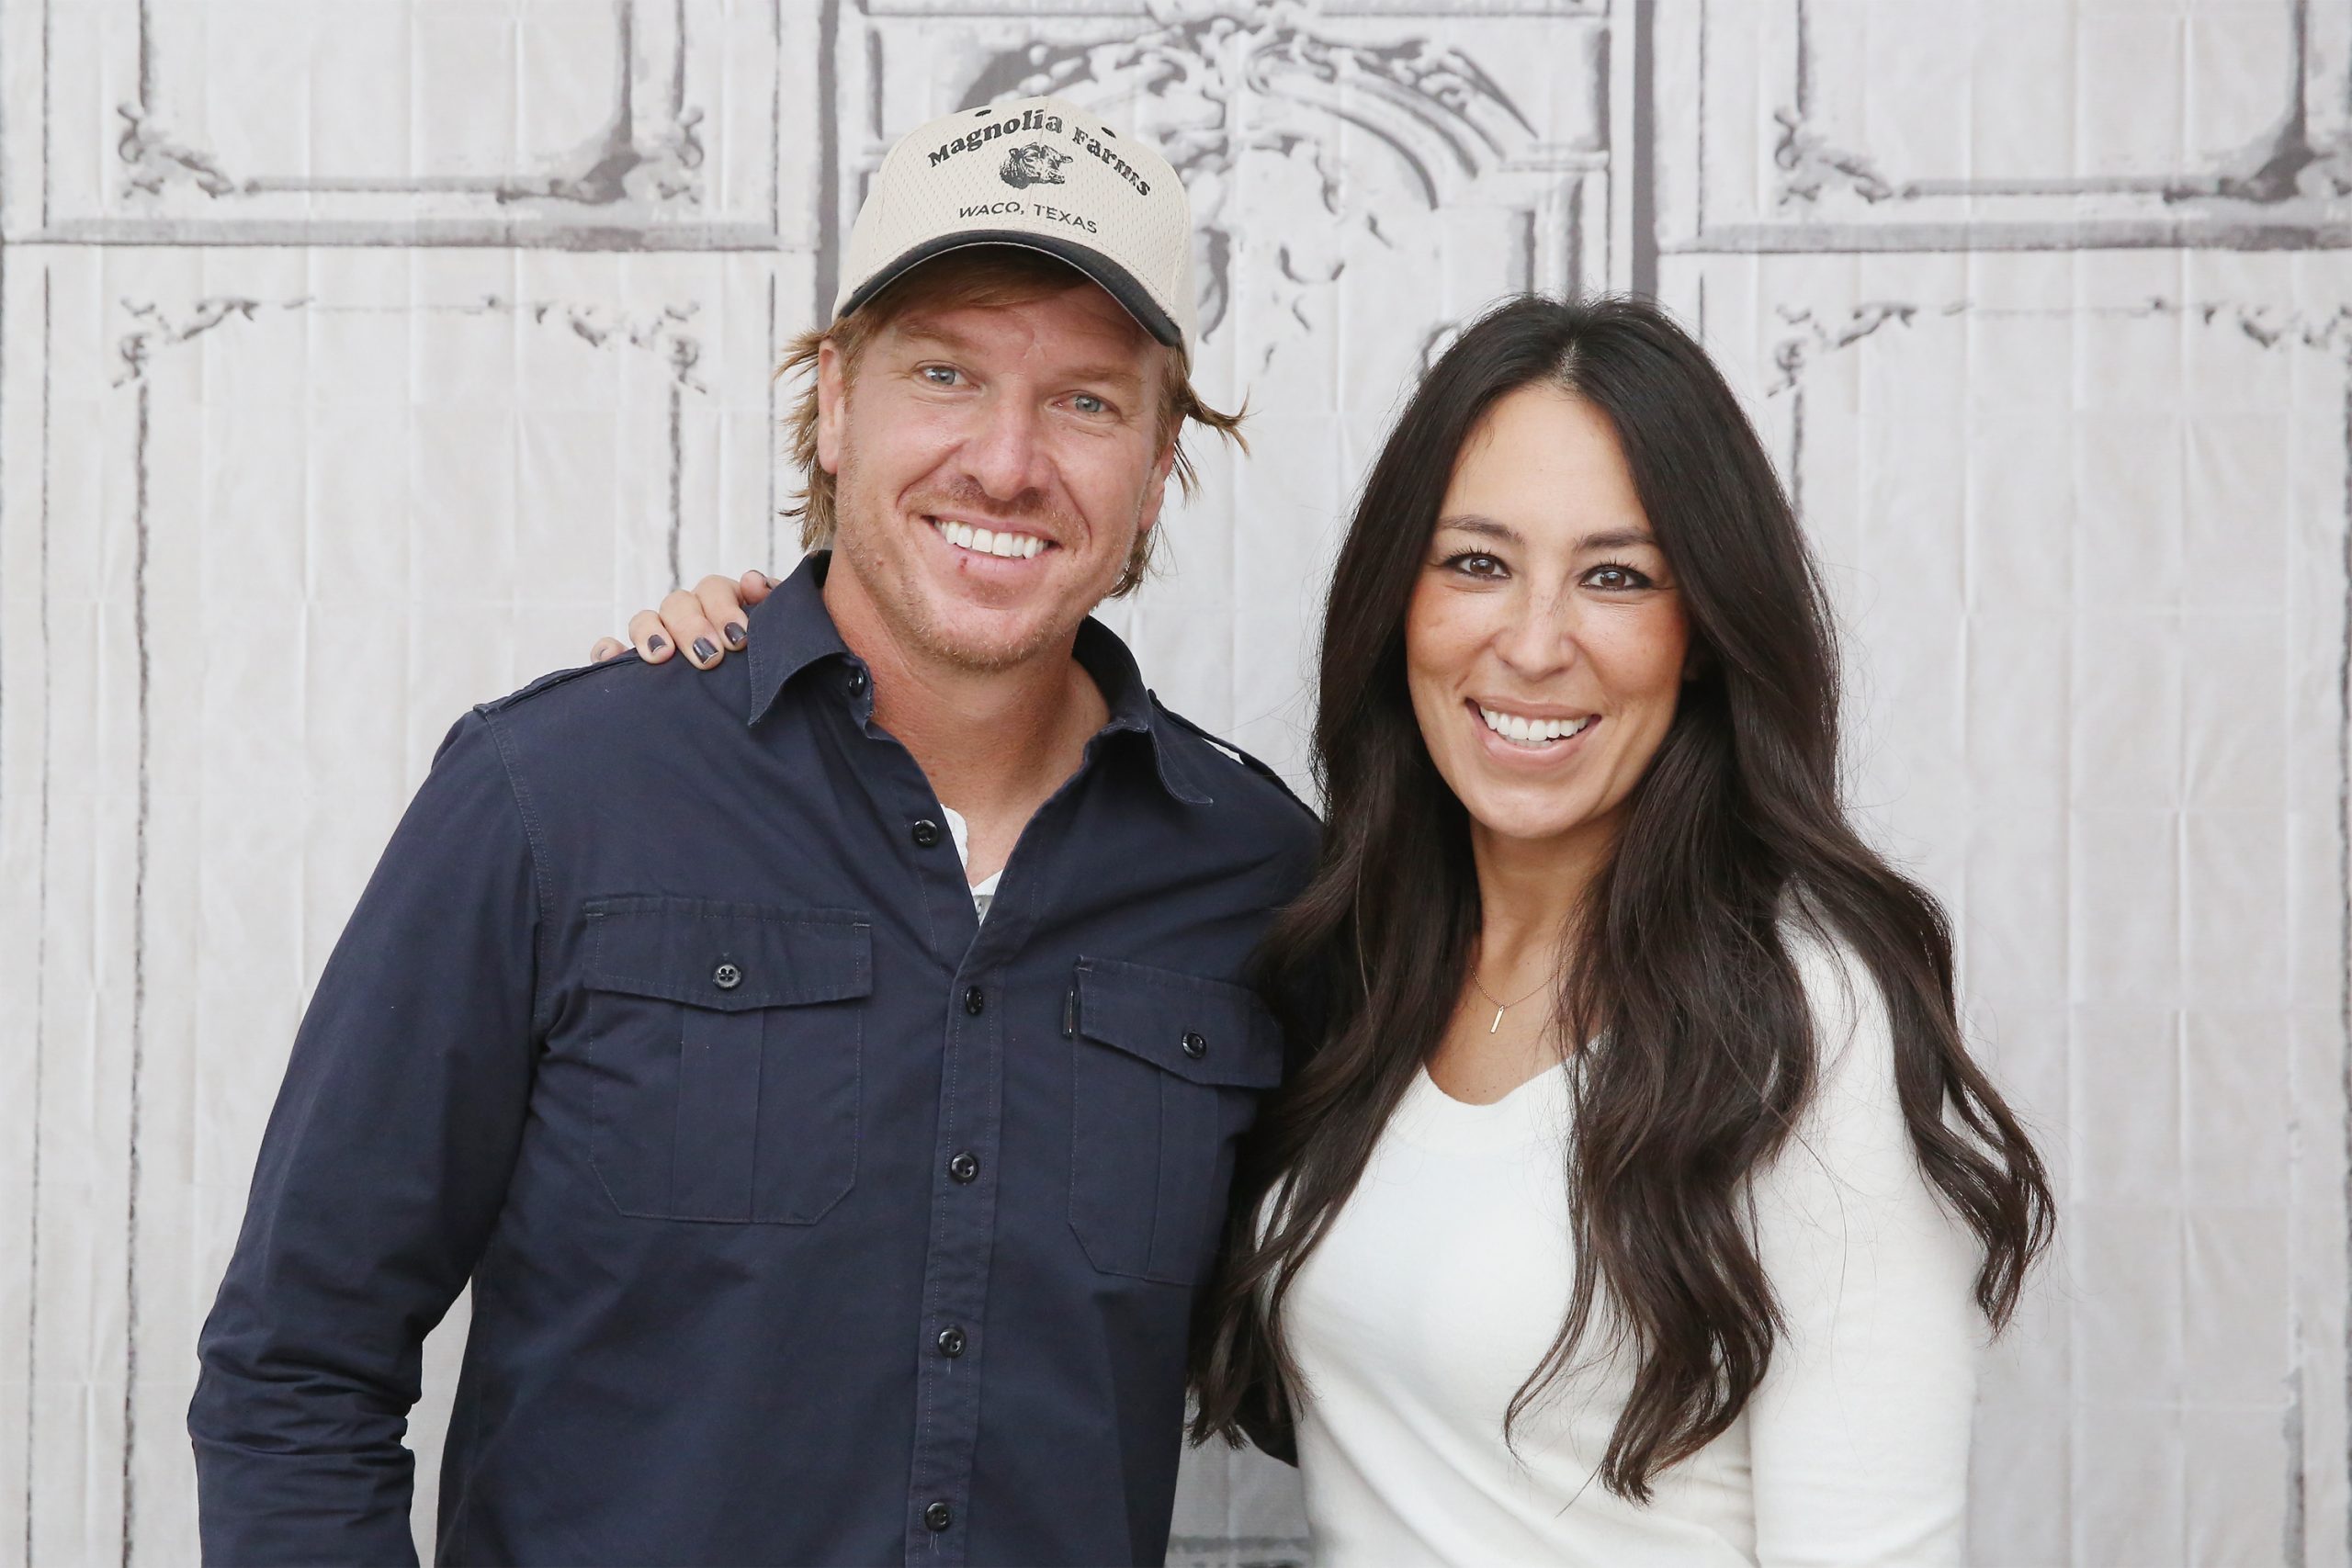 Joanna Gaines' Latest Home Makeover Shows How You Can Make the Most of Any Small Space